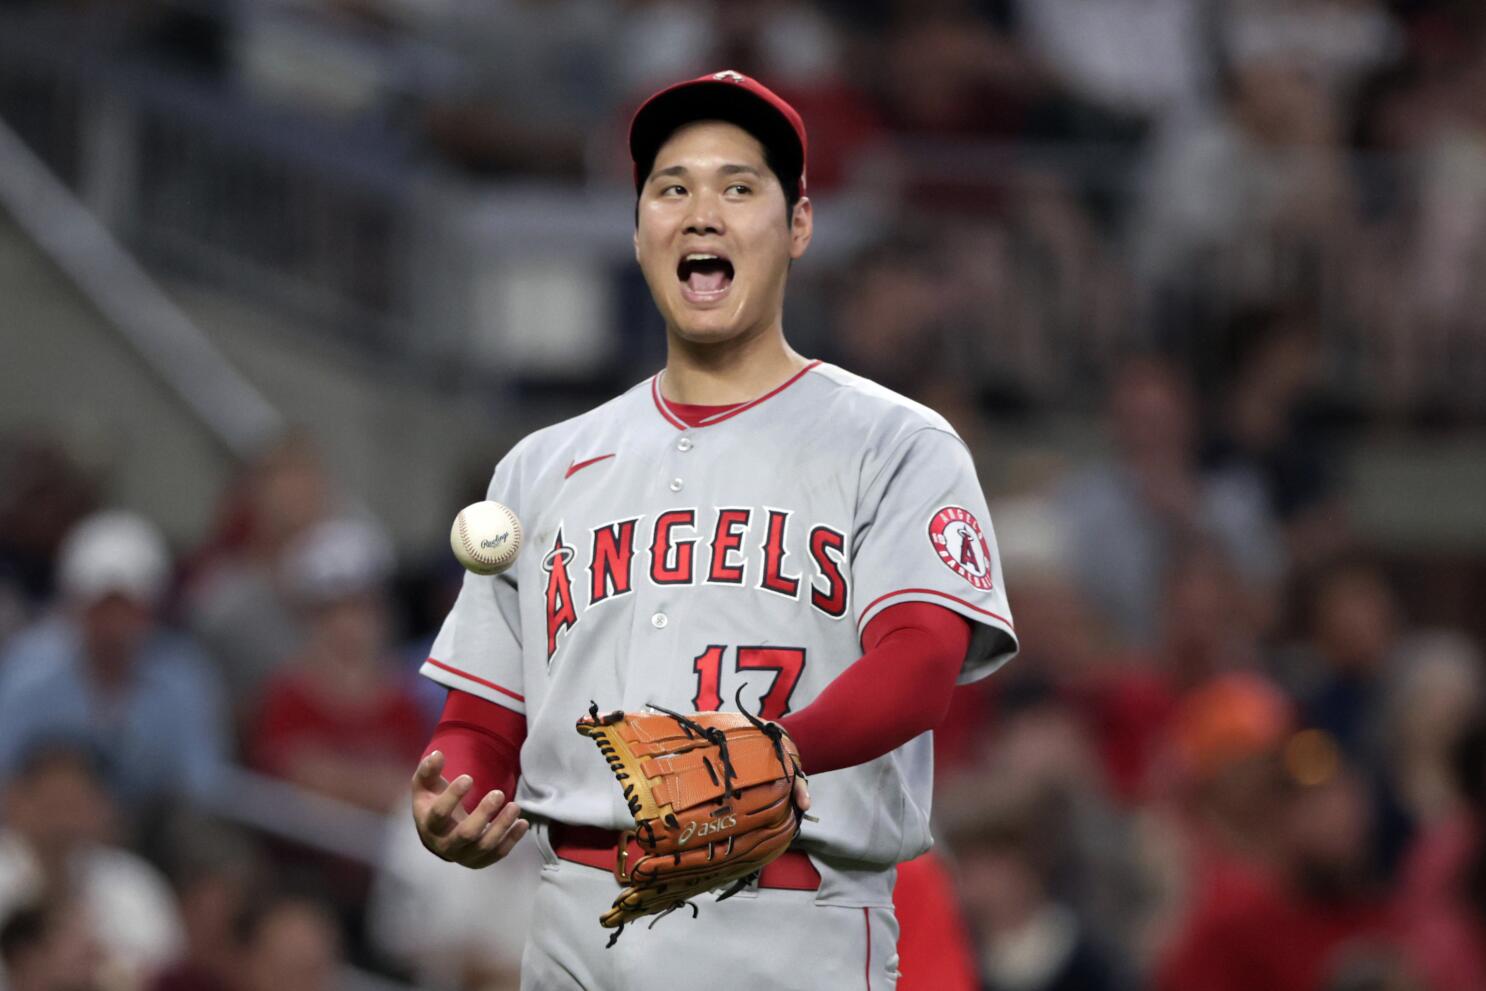 Shohei Ohtani's mentor 'relieved' he's thriving; Angels lose to